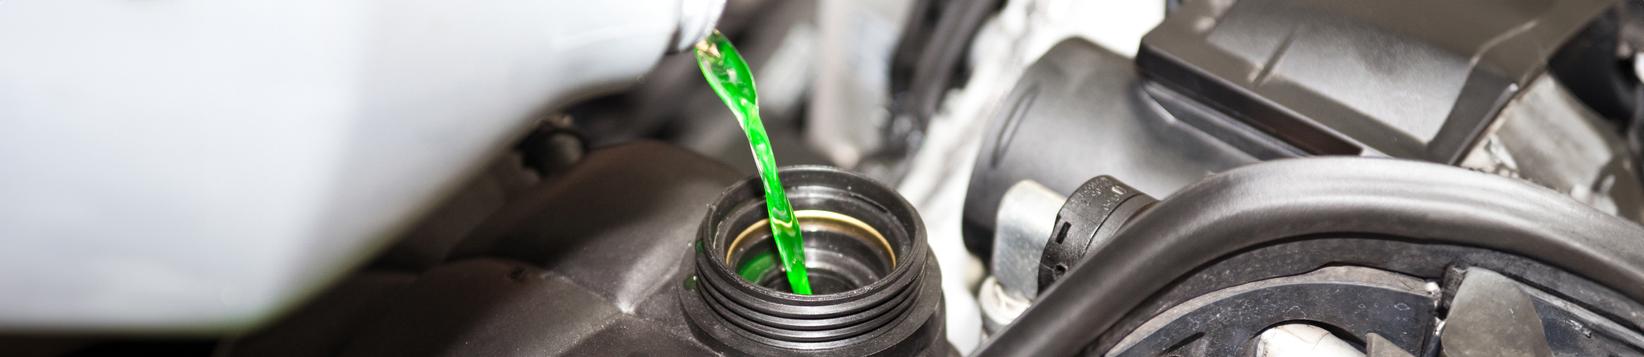 How to choose the right hydraulic oil?